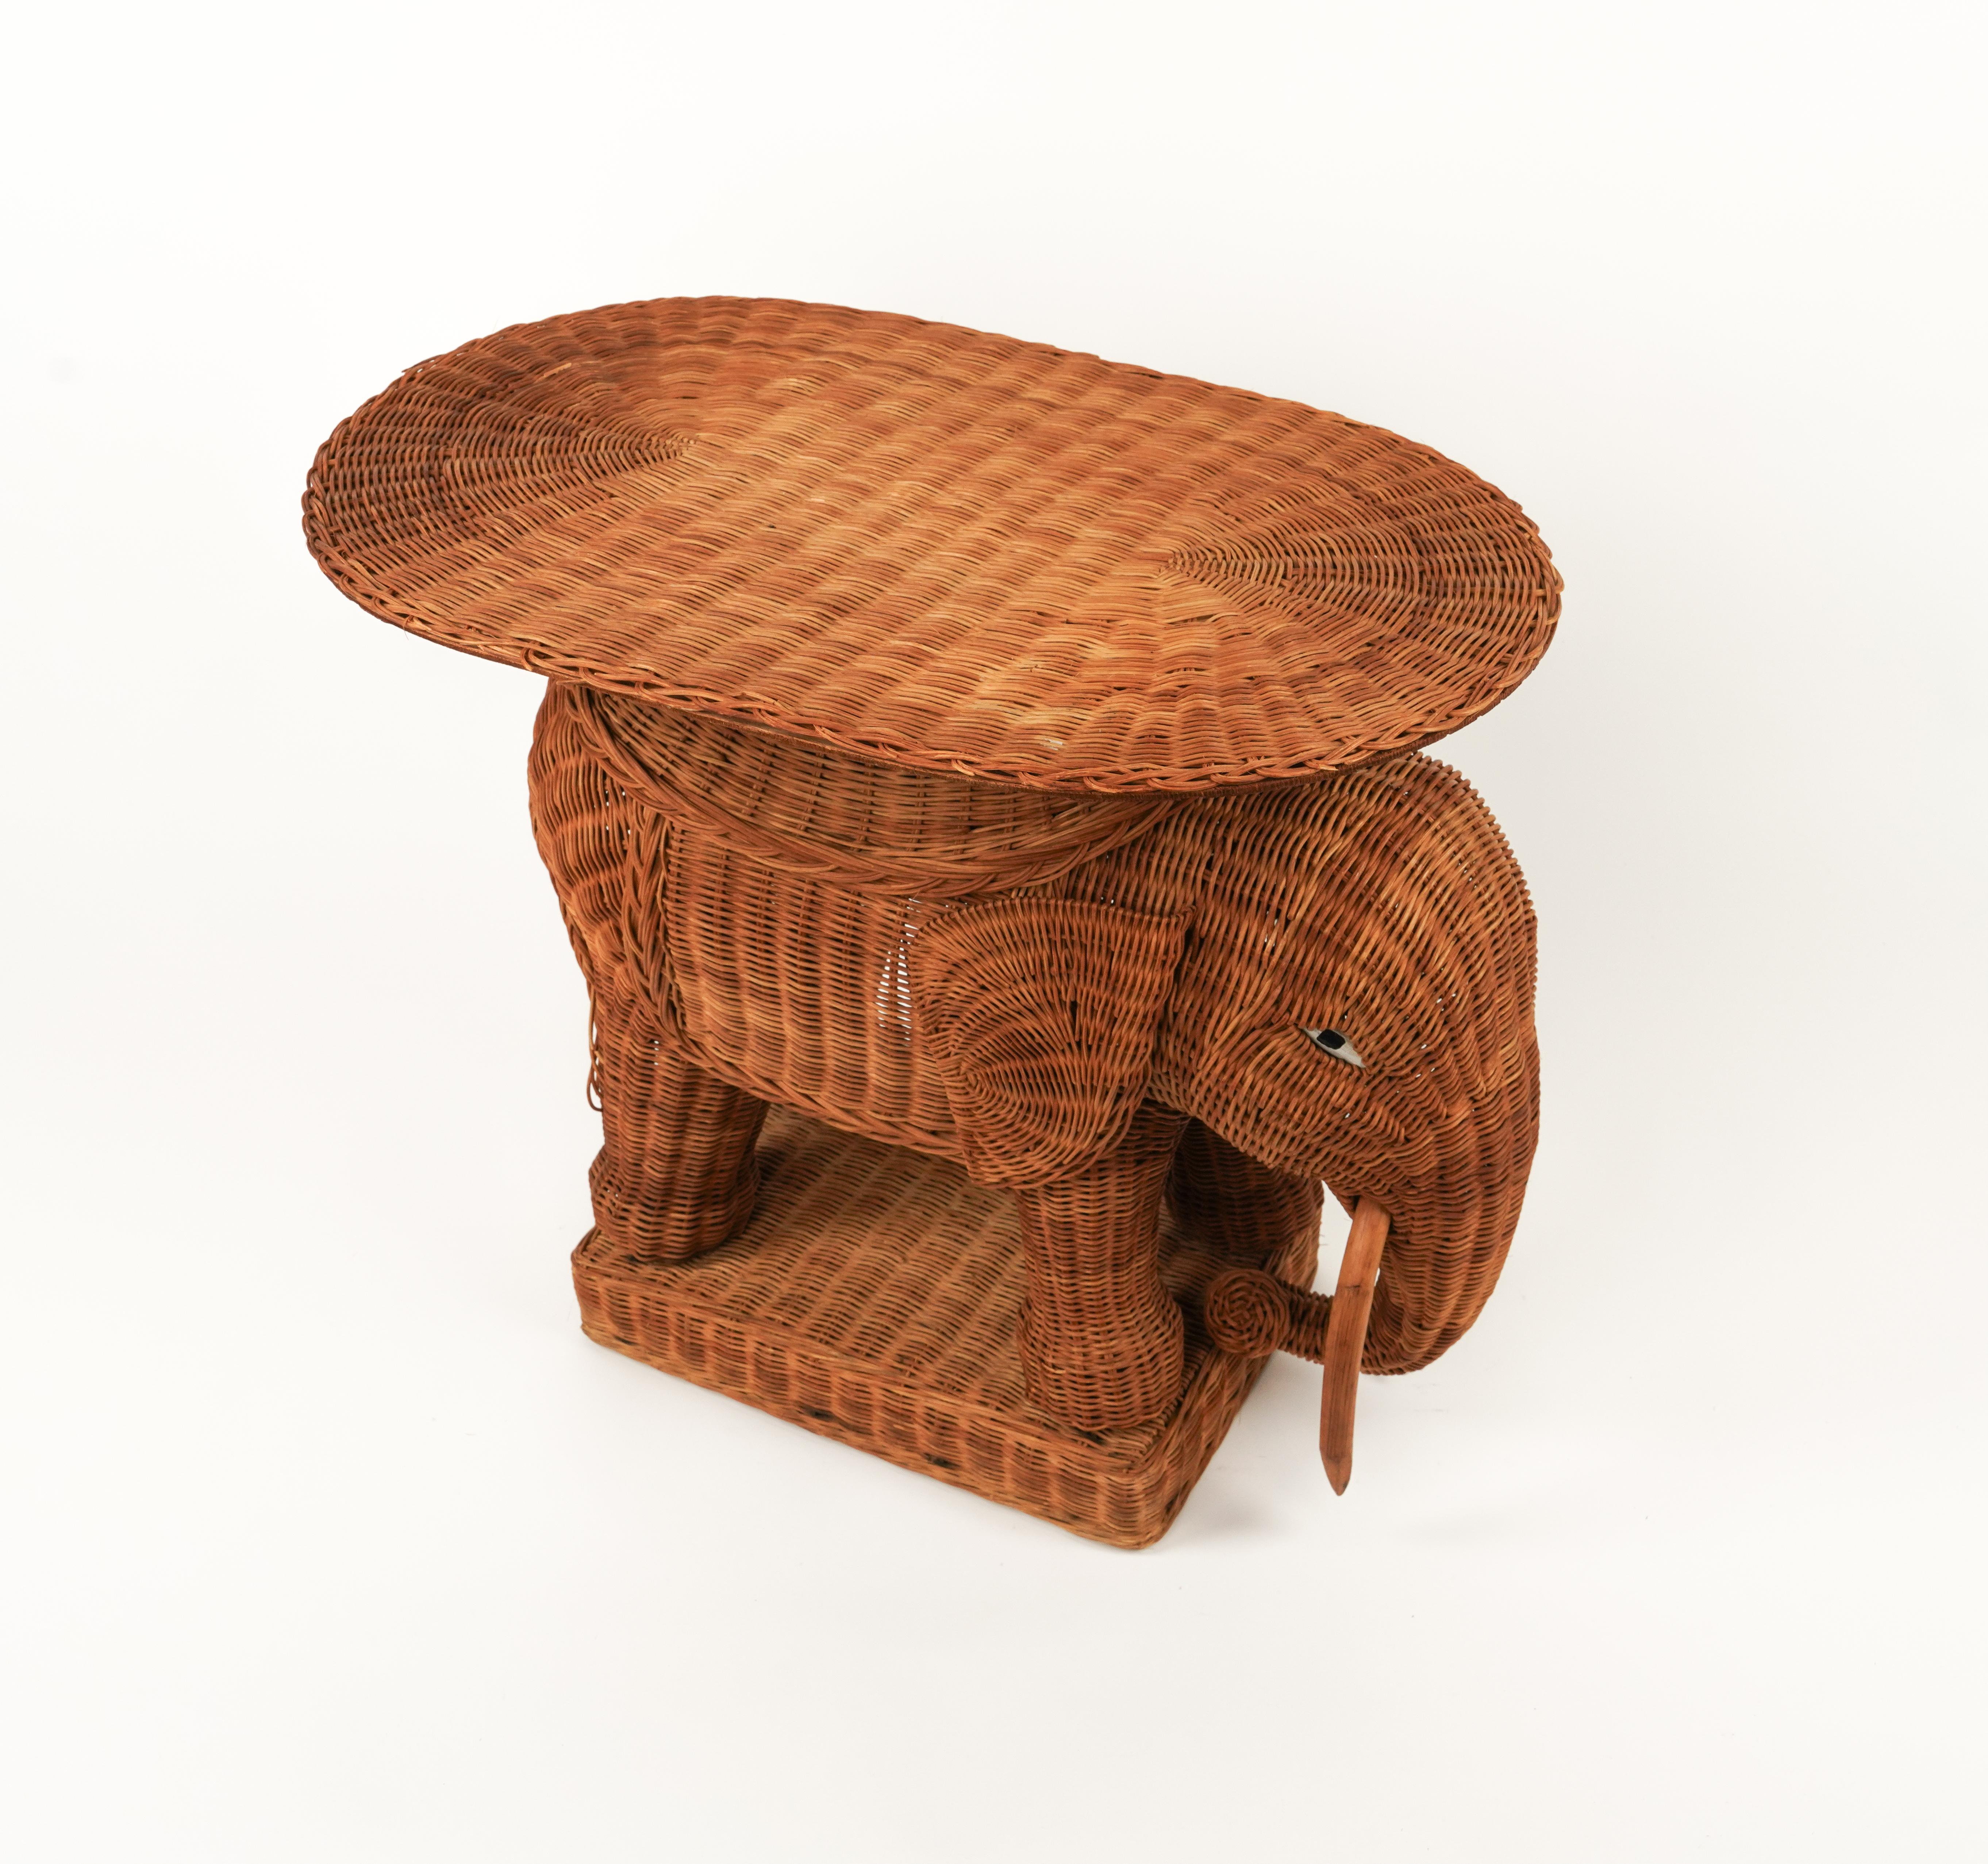 Rattan and Wicker Elephant Side Coffee Table Vivai Del Sud Style, Italy, 1960s For Sale 11